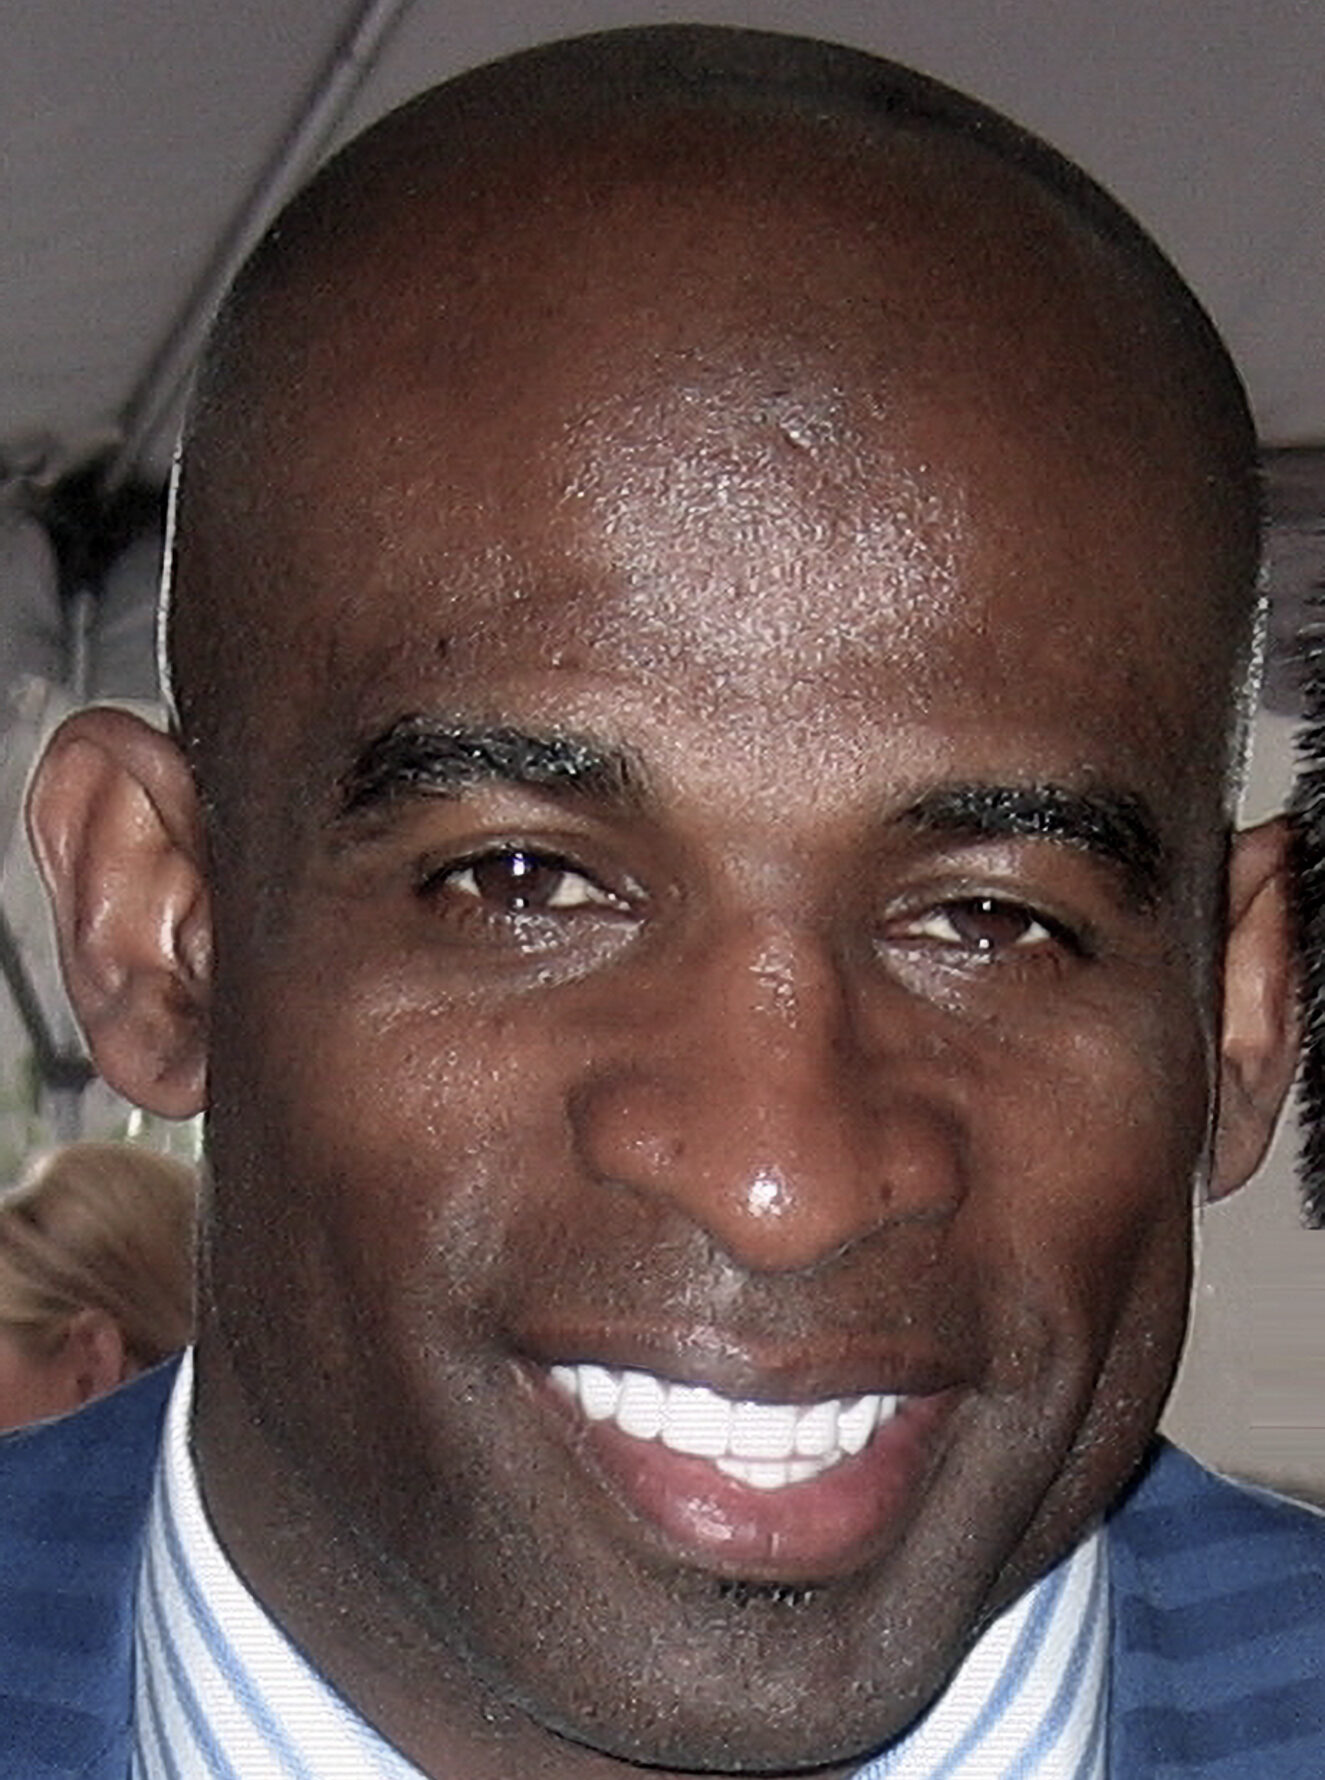 Deion Saunders, pictured, on May 11, 2008. Photo credit: Deion Sanders, ericifeng